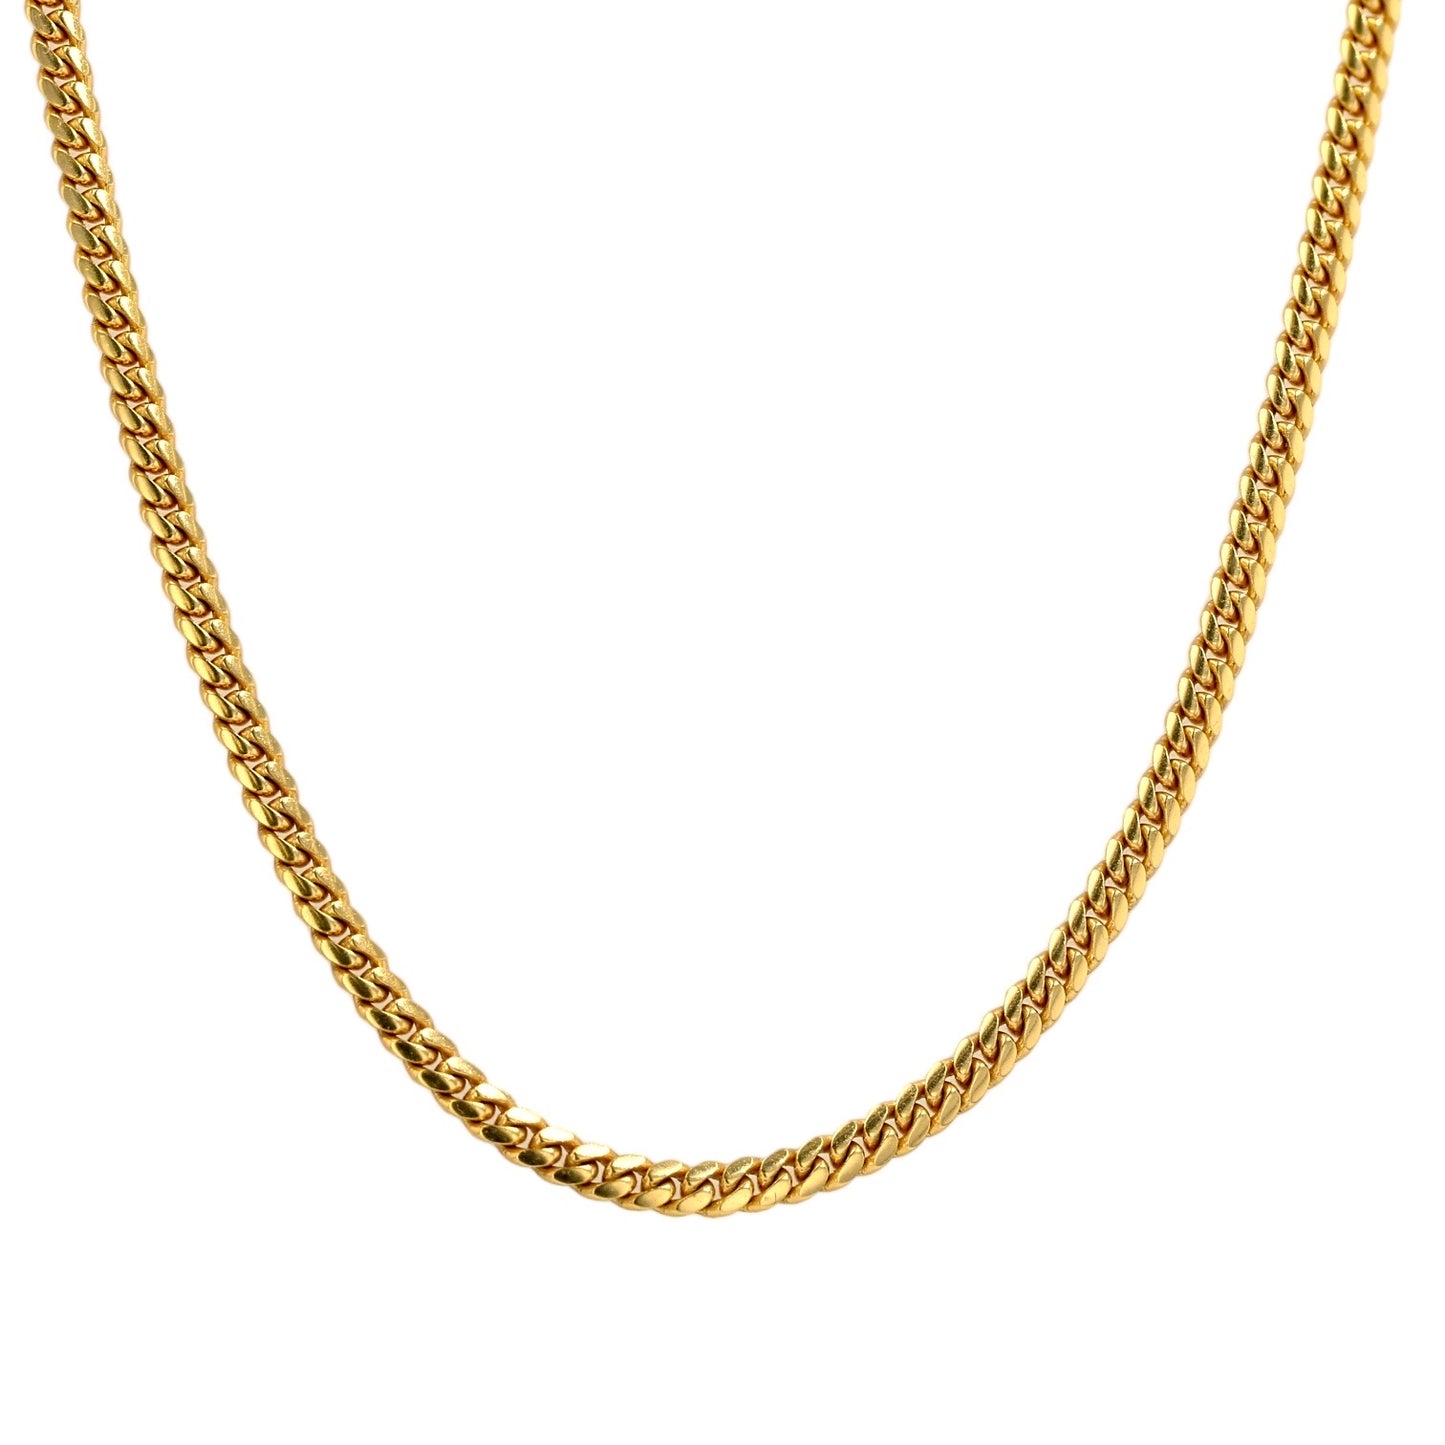 Yellow 18k gold solid miami Cuban link chain